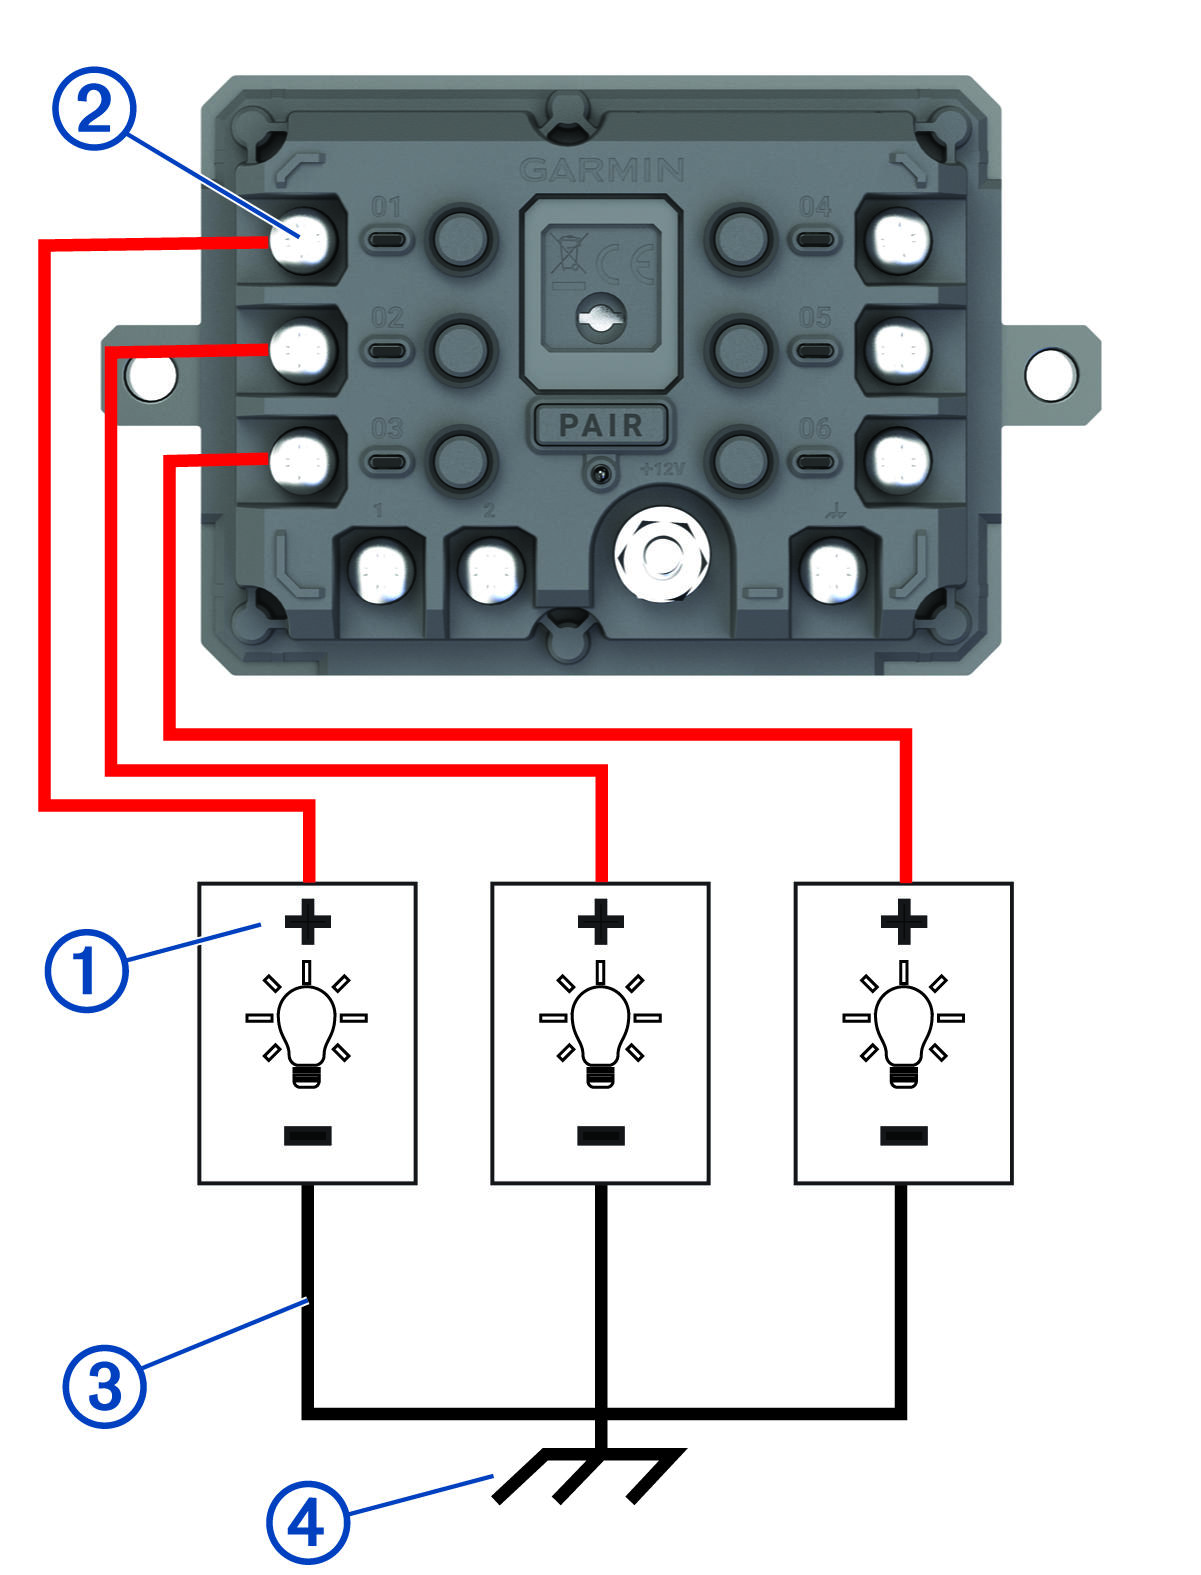 Wiring diagram of power and ground connections with callouts